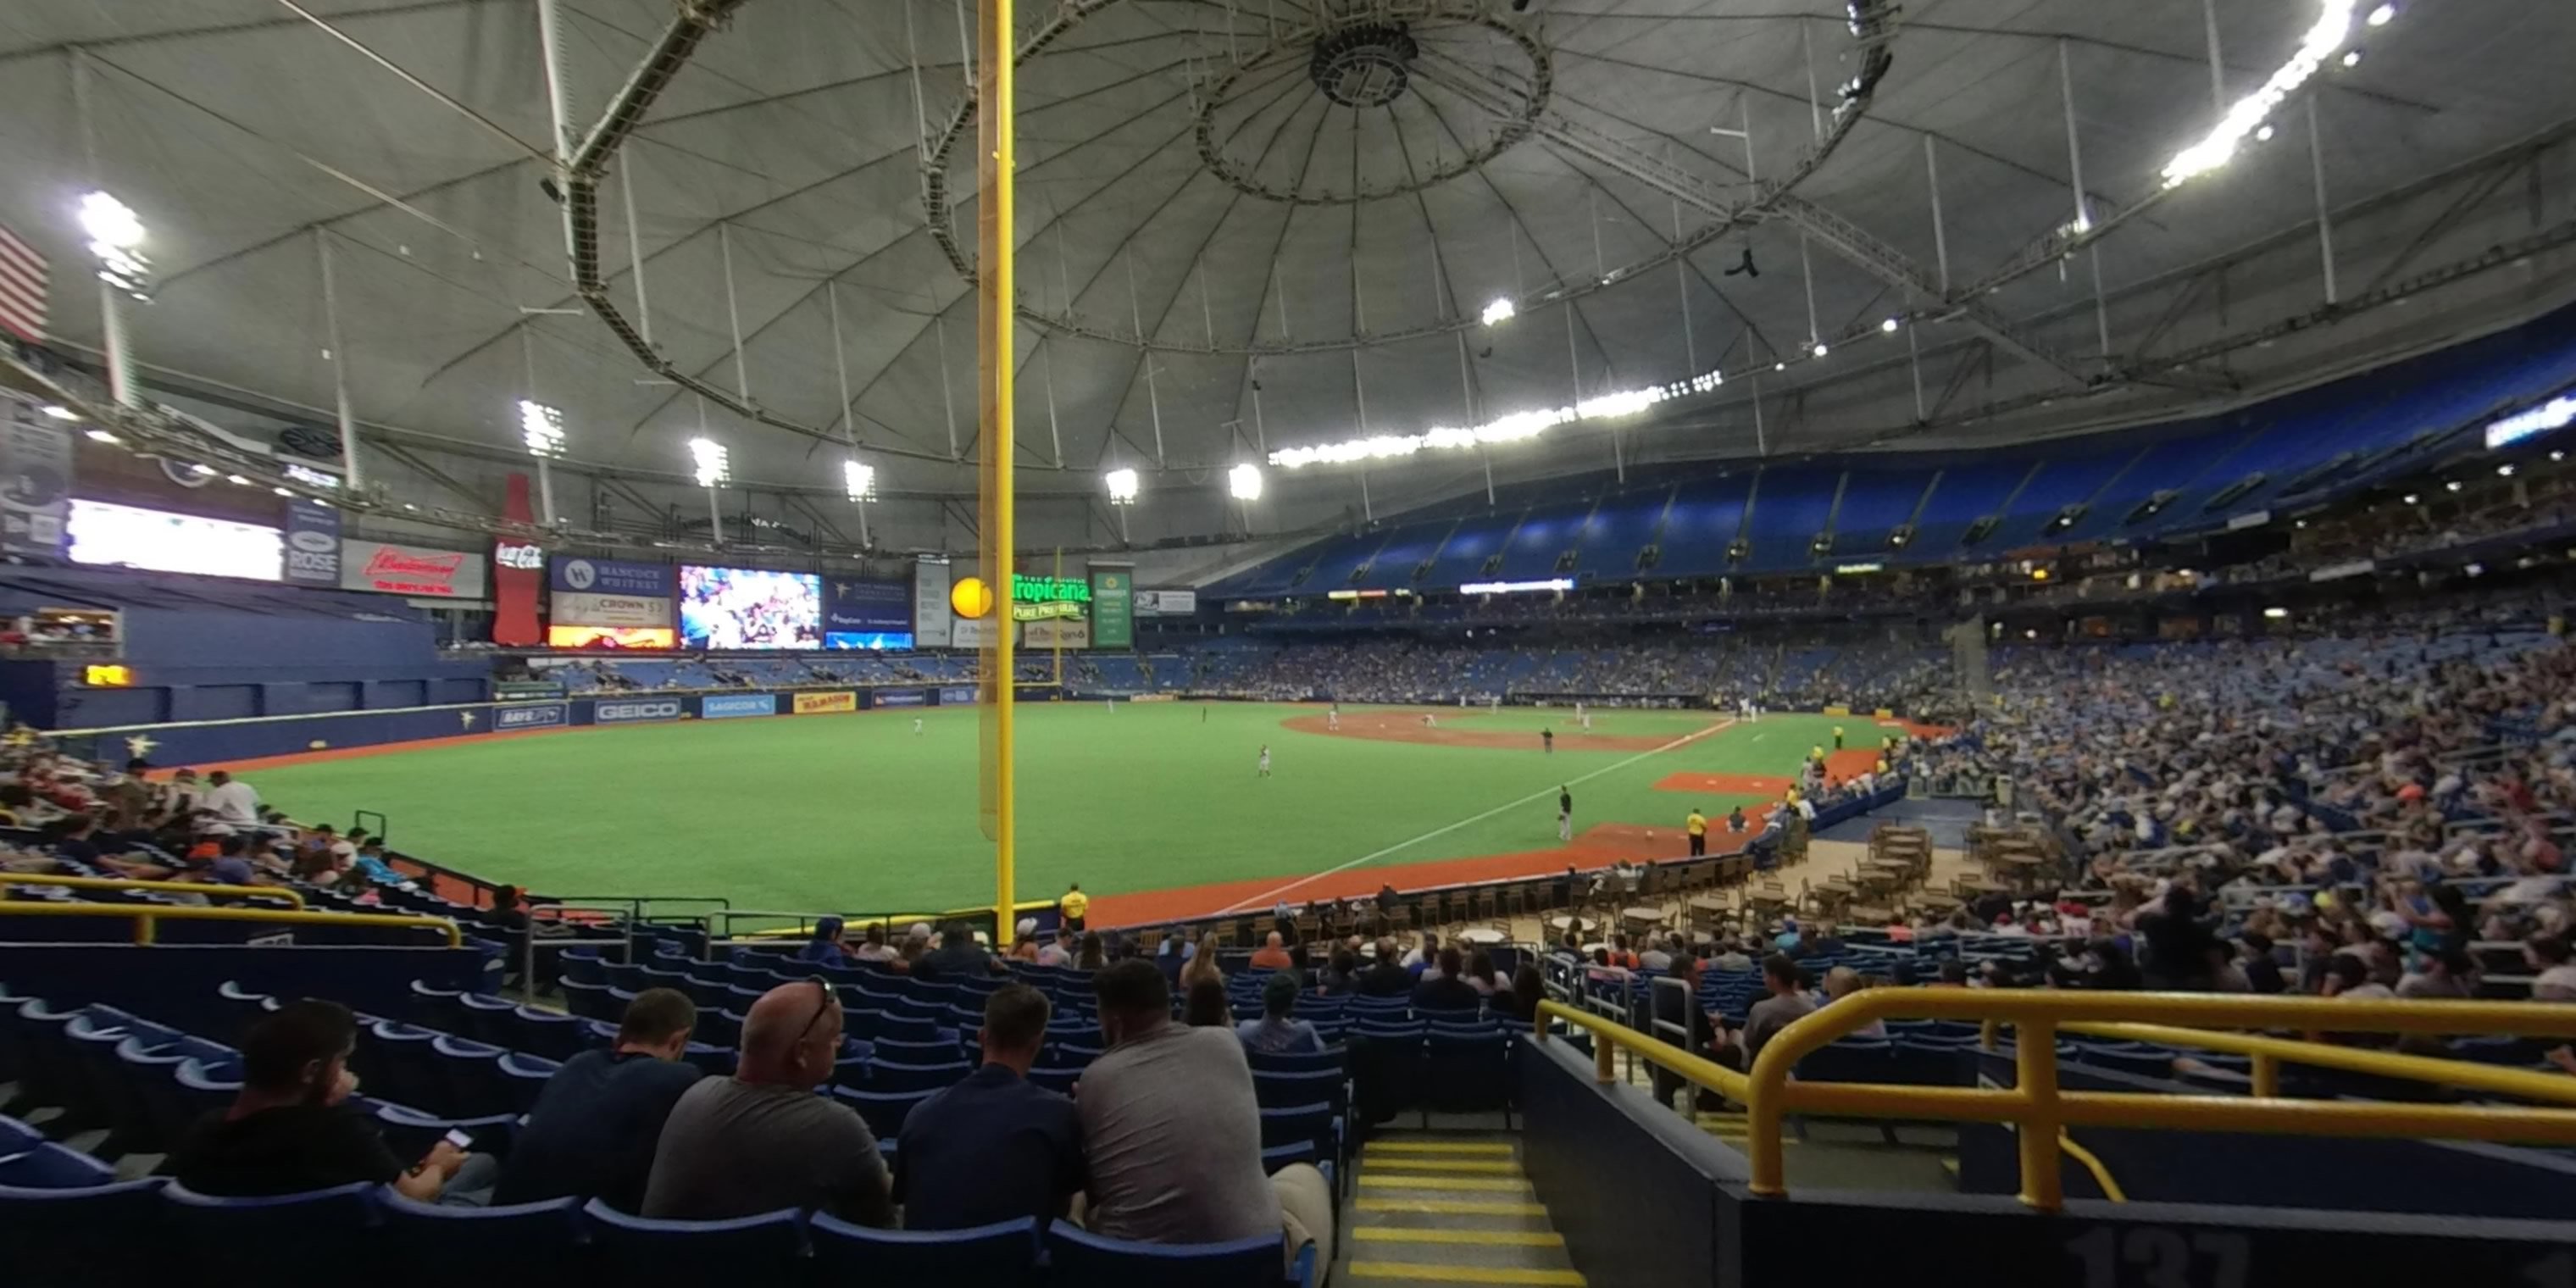 Section 137 At Tropicana Field